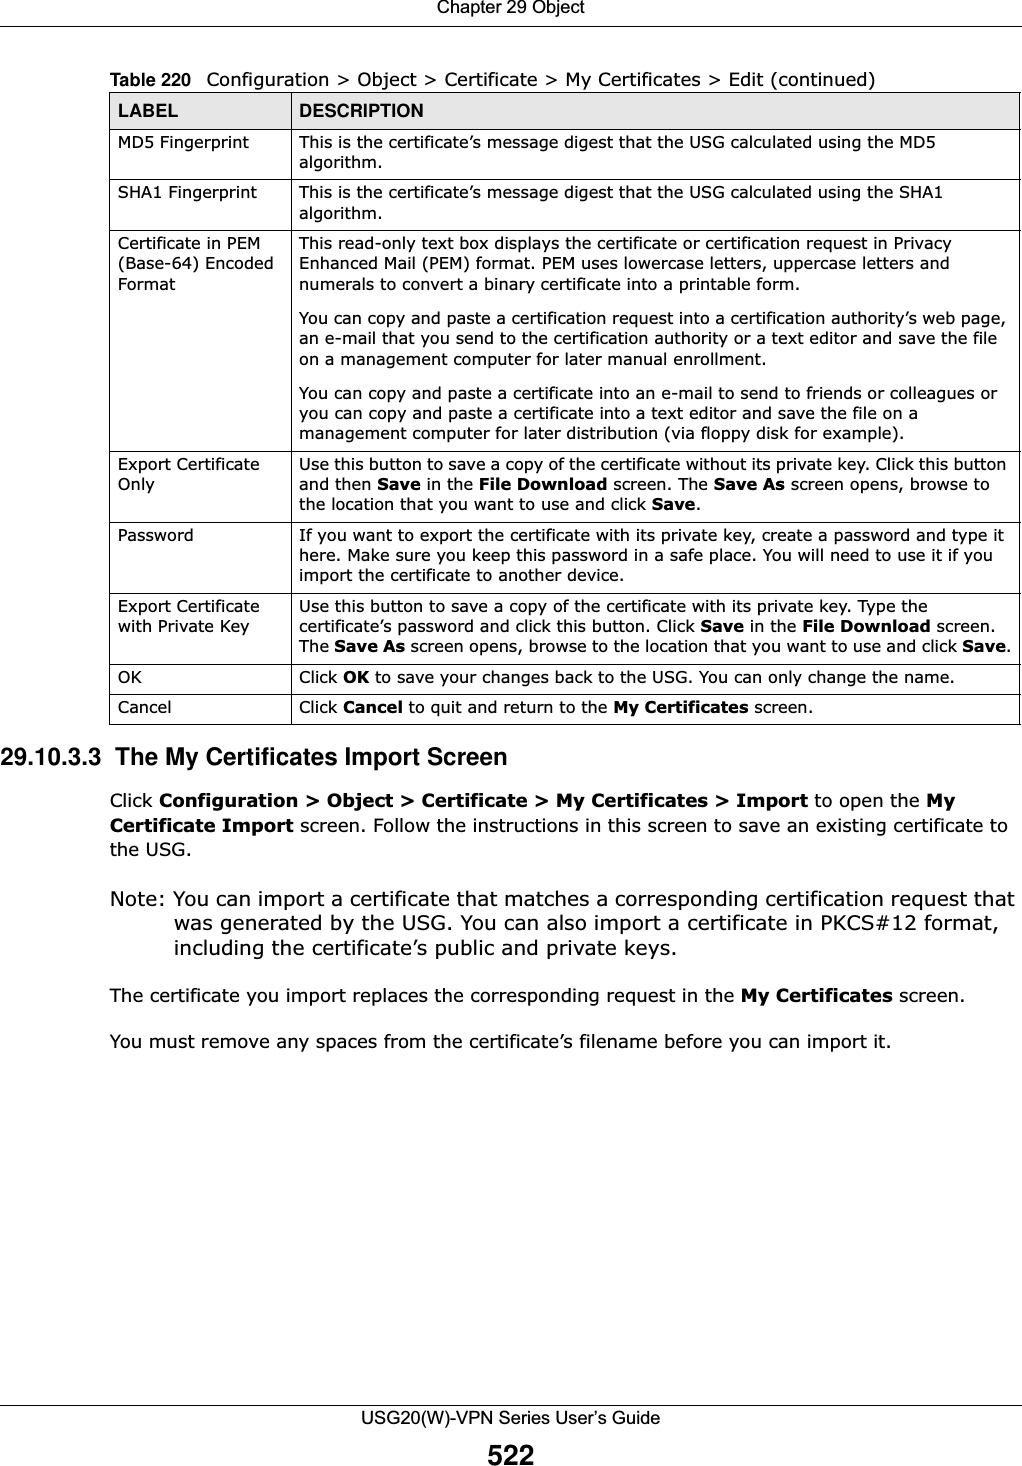 Chapter 29 ObjectUSG20(W)-VPN Series User’s Guide52229.10.3.3  The My Certificates Import Screen Click Configuration &gt; Object &gt; Certificate &gt; My Certificates &gt; Import to open the MyCertificate Import screen. Follow the instructions in this screen to save an existing certificate to the USG. Note: You can import a certificate that matches a corresponding certification request that was generated by the USG. You can also import a certificate in PKCS#12 format, including the certificate’s public and private keys.The certificate you import replaces the corresponding request in the My Certificates screen.You must remove any spaces from the certificate’s filename before you can import it.MD5 Fingerprint This is the certificate’s message digest that the USG calculated using the MD5 algorithm. SHA1 Fingerprint This is the certificate’s message digest that the USG calculated using the SHA1 algorithm. Certificate in PEM (Base-64) Encoded FormatThis read-only text box displays the certificate or certification request in Privacy Enhanced Mail (PEM) format. PEM uses lowercase letters, uppercase letters and numerals to convert a binary certificate into a printable form.You can copy and paste a certification request into a certification authority’s web page, an e-mail that you send to the certification authority or a text editor and save the file on a management computer for later manual enrollment.You can copy and paste a certificate into an e-mail to send to friends or colleagues or you can copy and paste a certificate into a text editor and save the file on a management computer for later distribution (via floppy disk for example).Export Certificate OnlyUse this button to save a copy of the certificate without its private key. Click this button and then Save in the File Download screen. The Save As screen opens, browse to the location that you want to use and click Save.Password If you want to export the certificate with its private key, create a password and type it here. Make sure you keep this password in a safe place. You will need to use it if you import the certificate to another device.Export Certificate with Private KeyUse this button to save a copy of the certificate with its private key. Type the certificate’s password and click this button. Click Save in the File Download screen. The Save As screen opens, browse to the location that you want to use and click Save.OK Click OK to save your changes back to the USG. You can only change the name.Cancel Click Cancel to quit and return to the My Certificates screen.Table 220   Configuration &gt; Object &gt; Certificate &gt; My Certificates &gt; Edit (continued)LABEL DESCRIPTION